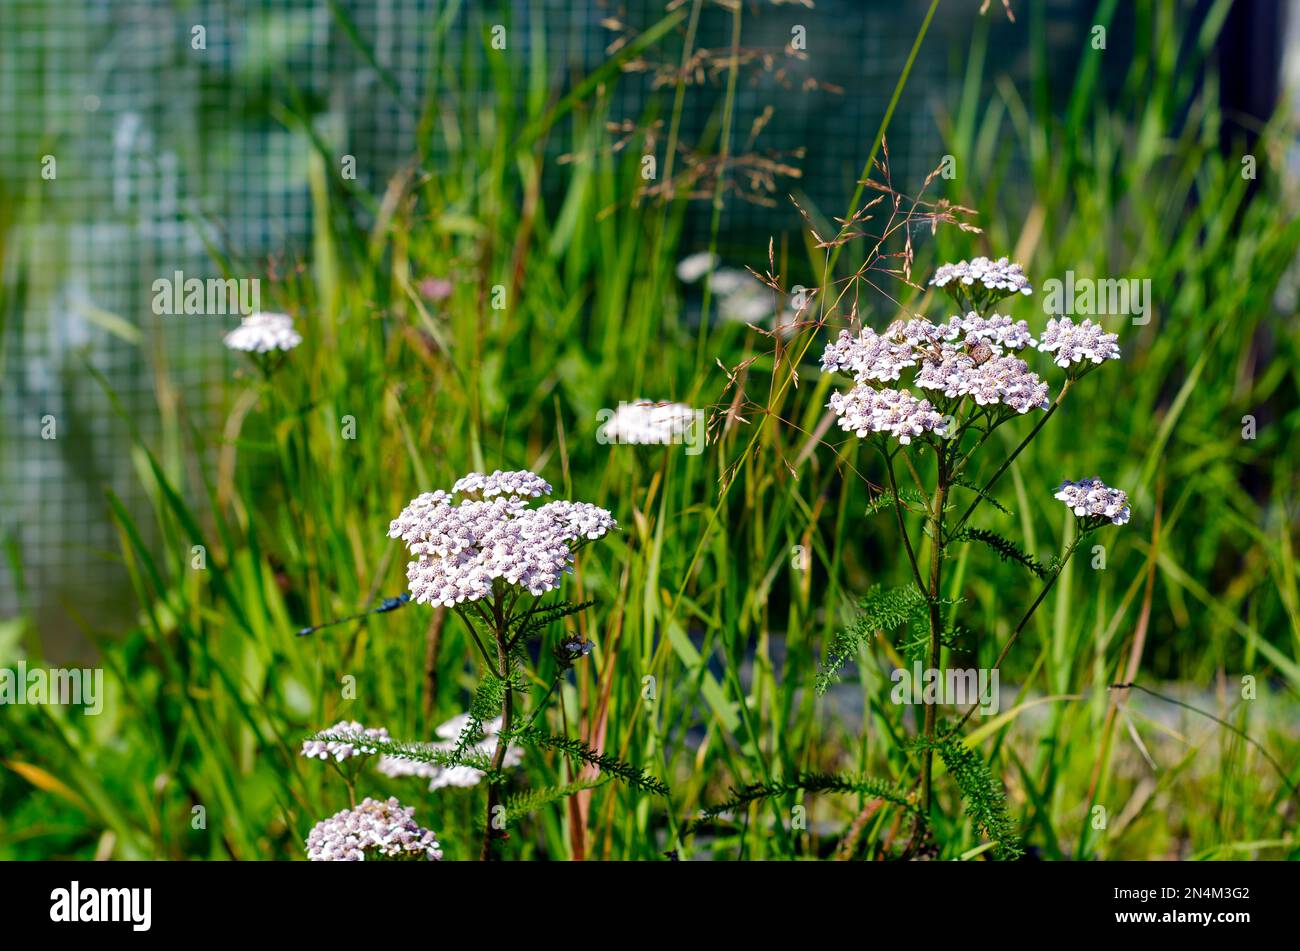 Wild medical plant yarrow with white flowers grows in the garden area on the background of green grass and greenhouse in the summer in the North of Ya Stock Photo